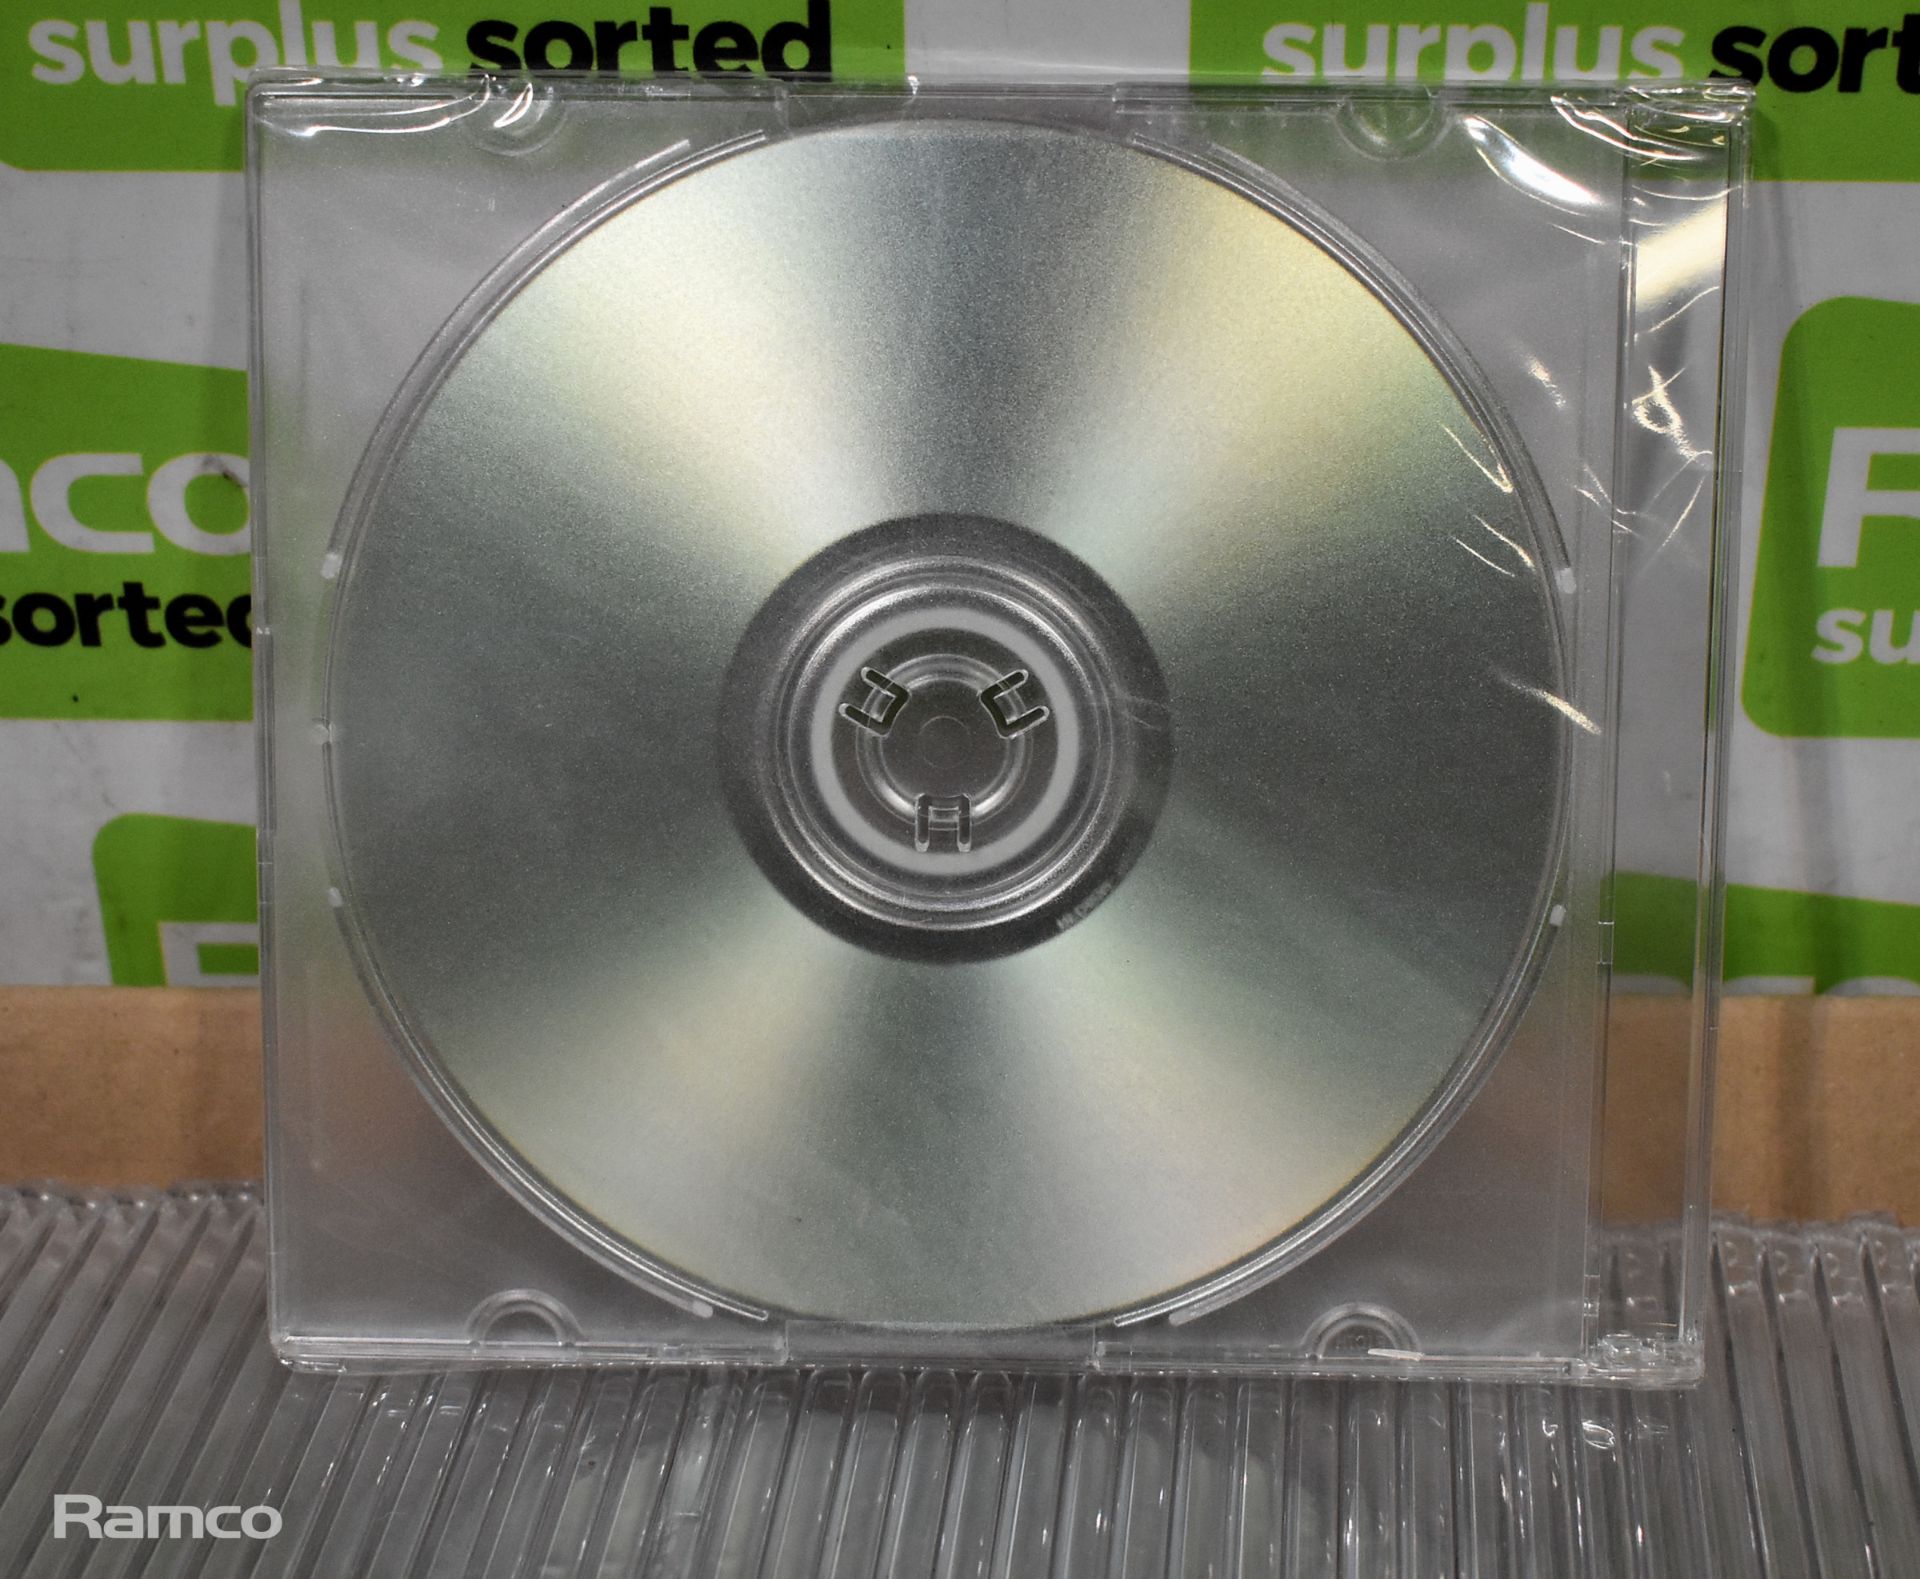 Recordable compact discs - approx 180 - Image 4 of 4